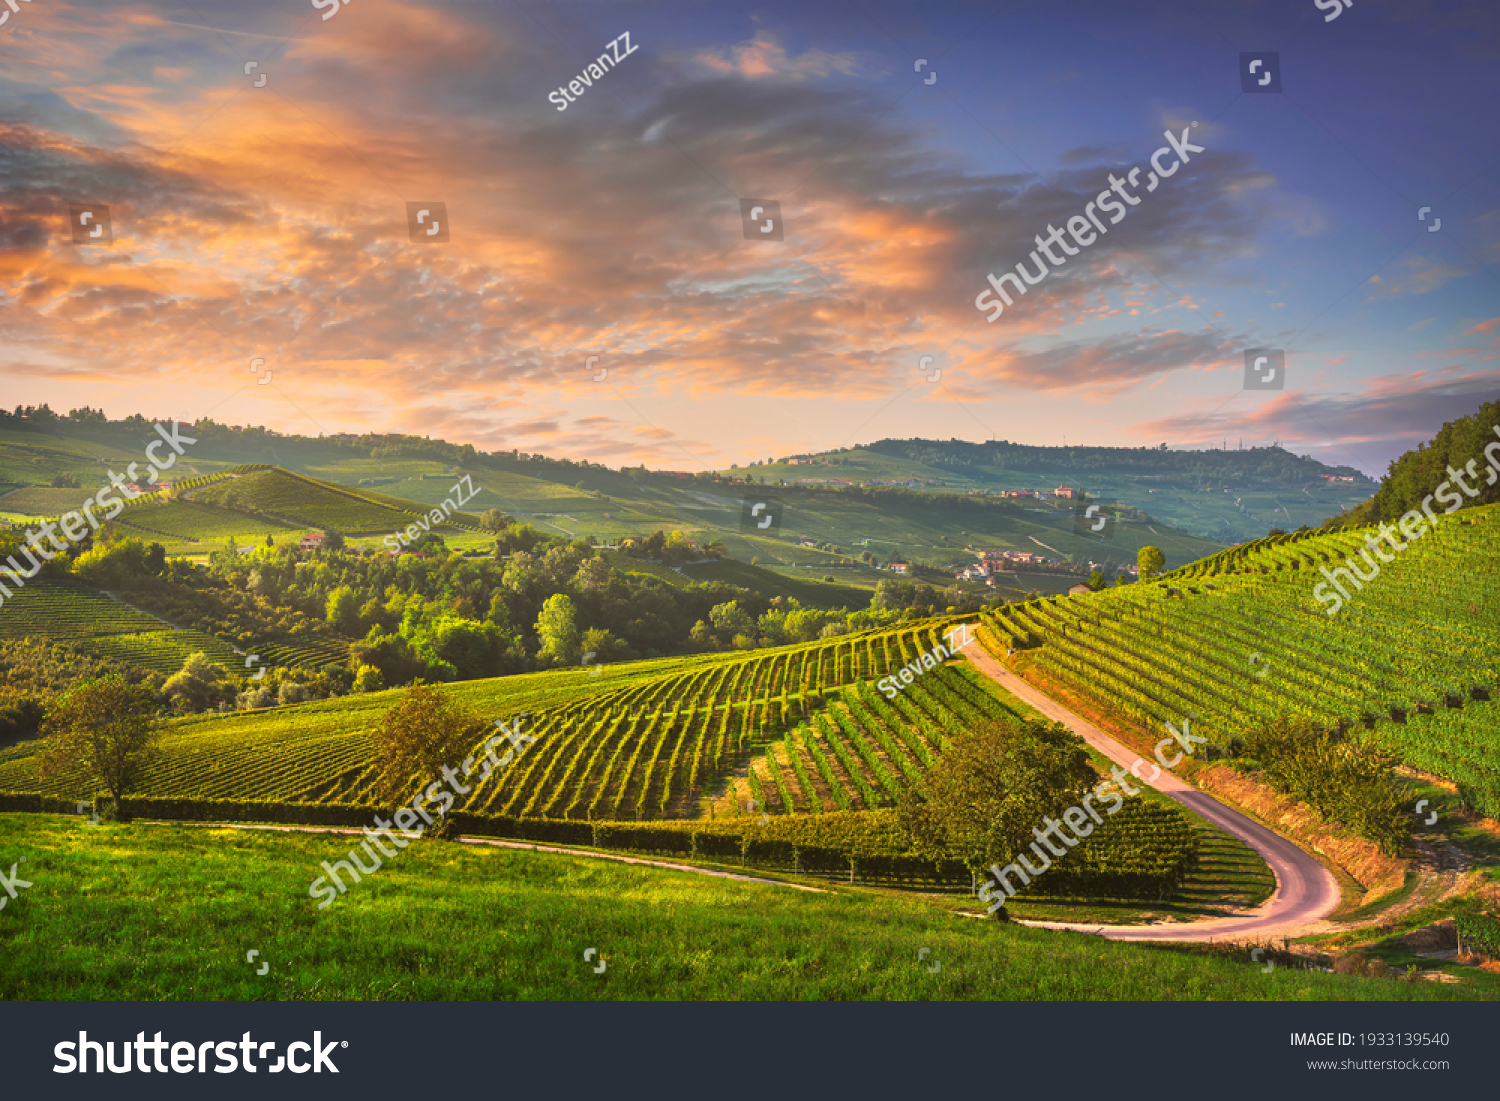 Langhe vineyards sunset panorama, Barolo and La Morra, Unesco Site, Piedmont, Northern Italy Europe. #1933139540